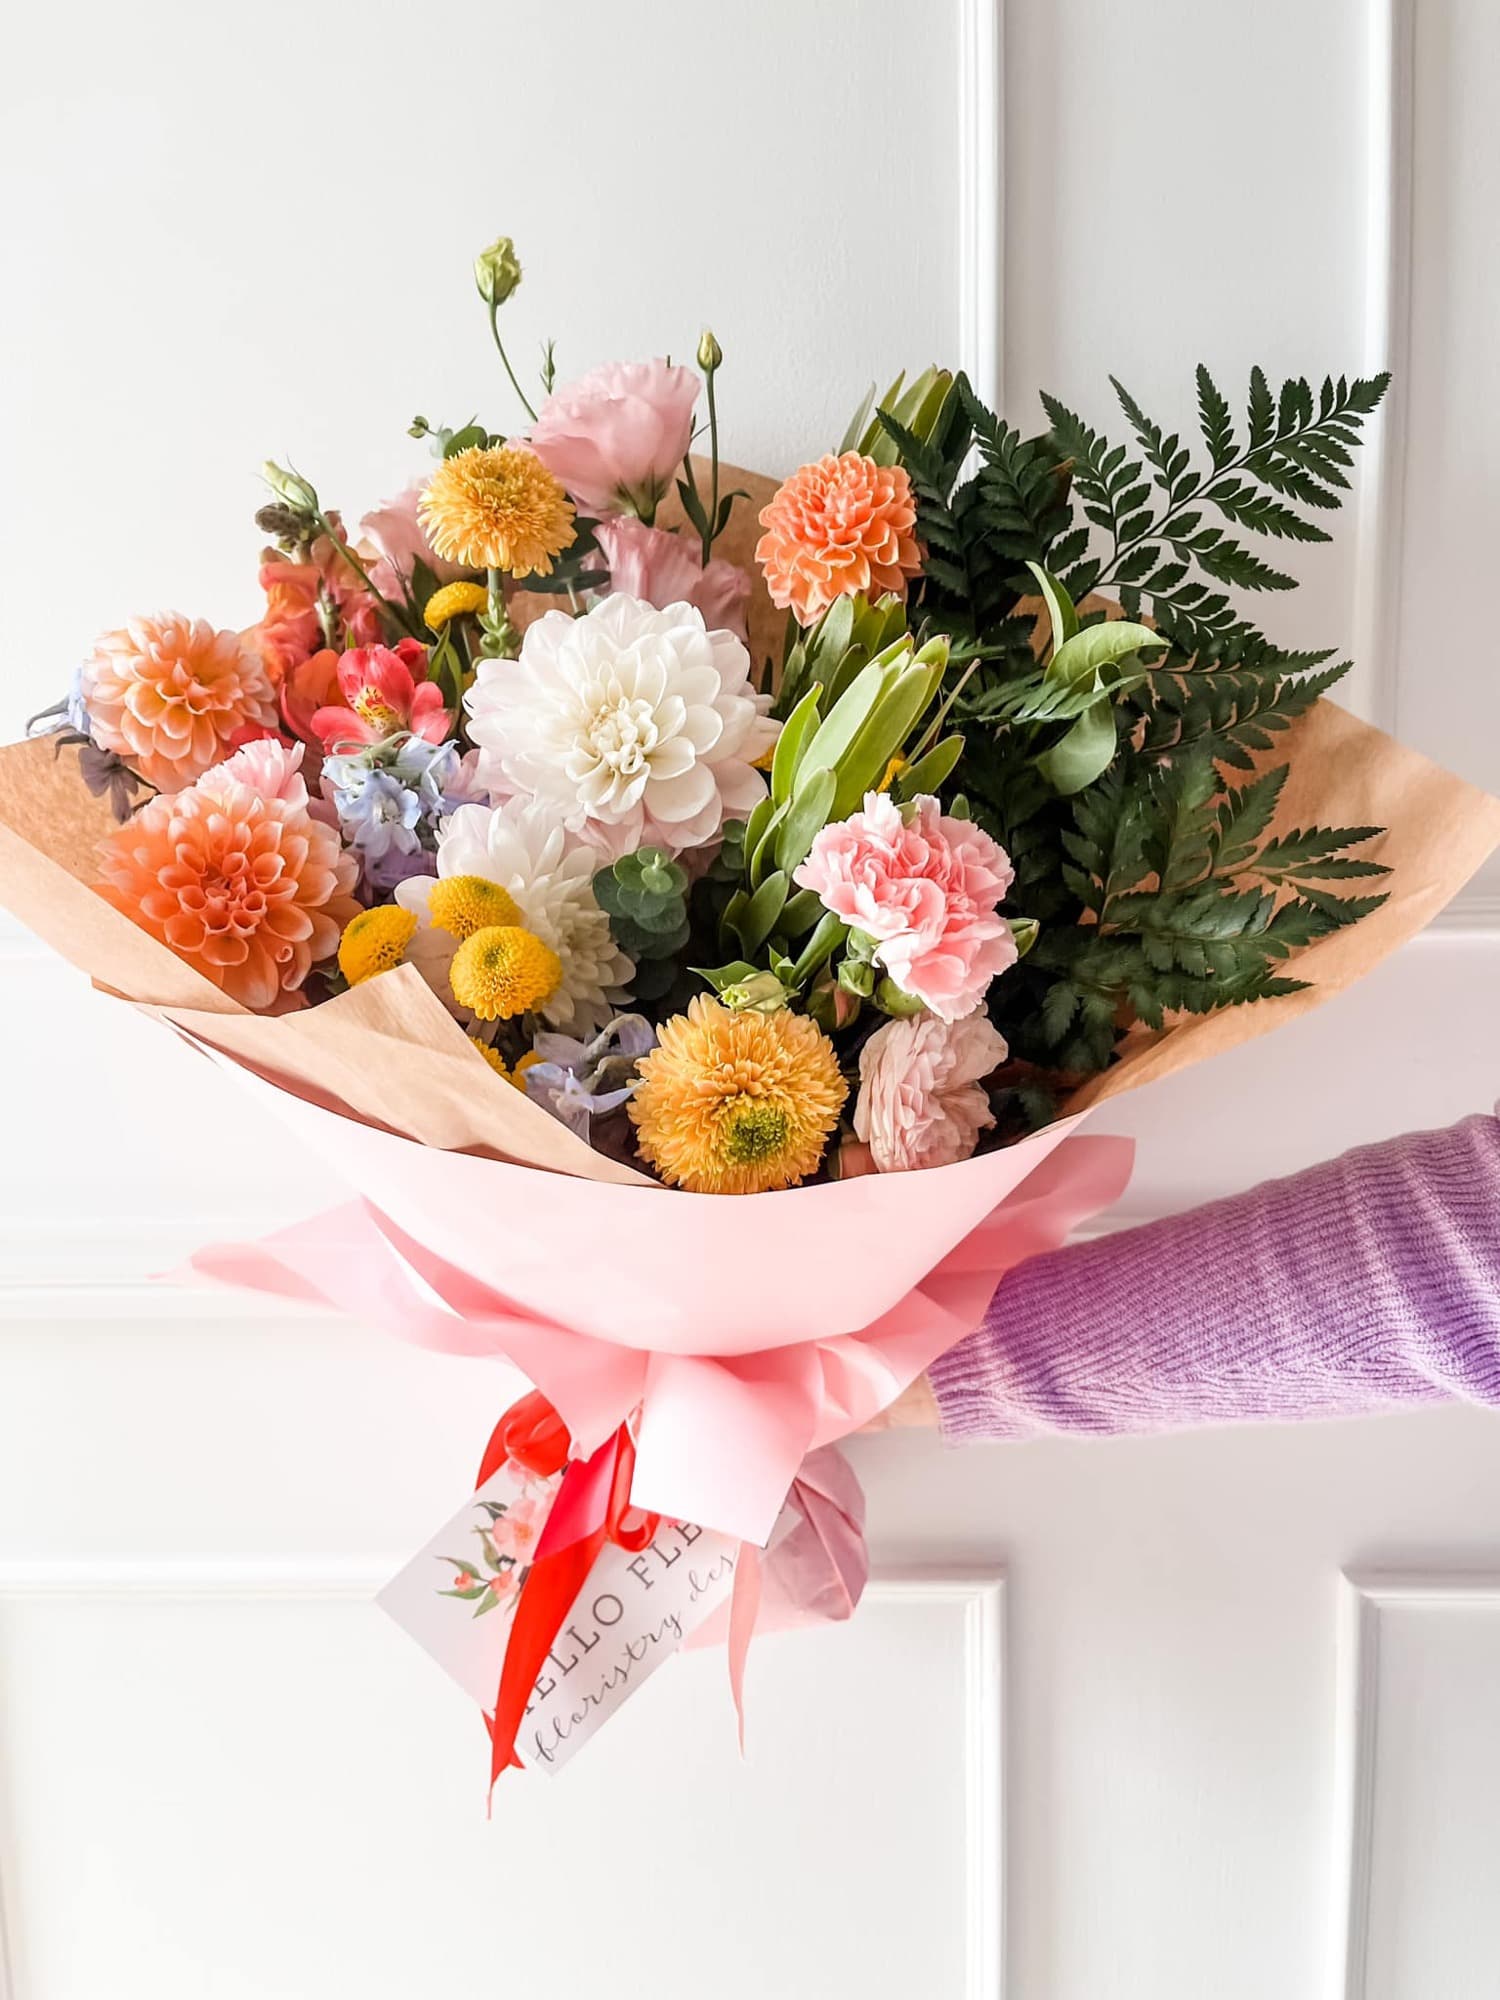 Muswellbrook Florist - Hello Fleur - Polly & Co - Delivery to Muswellbrook, Denman, Scone